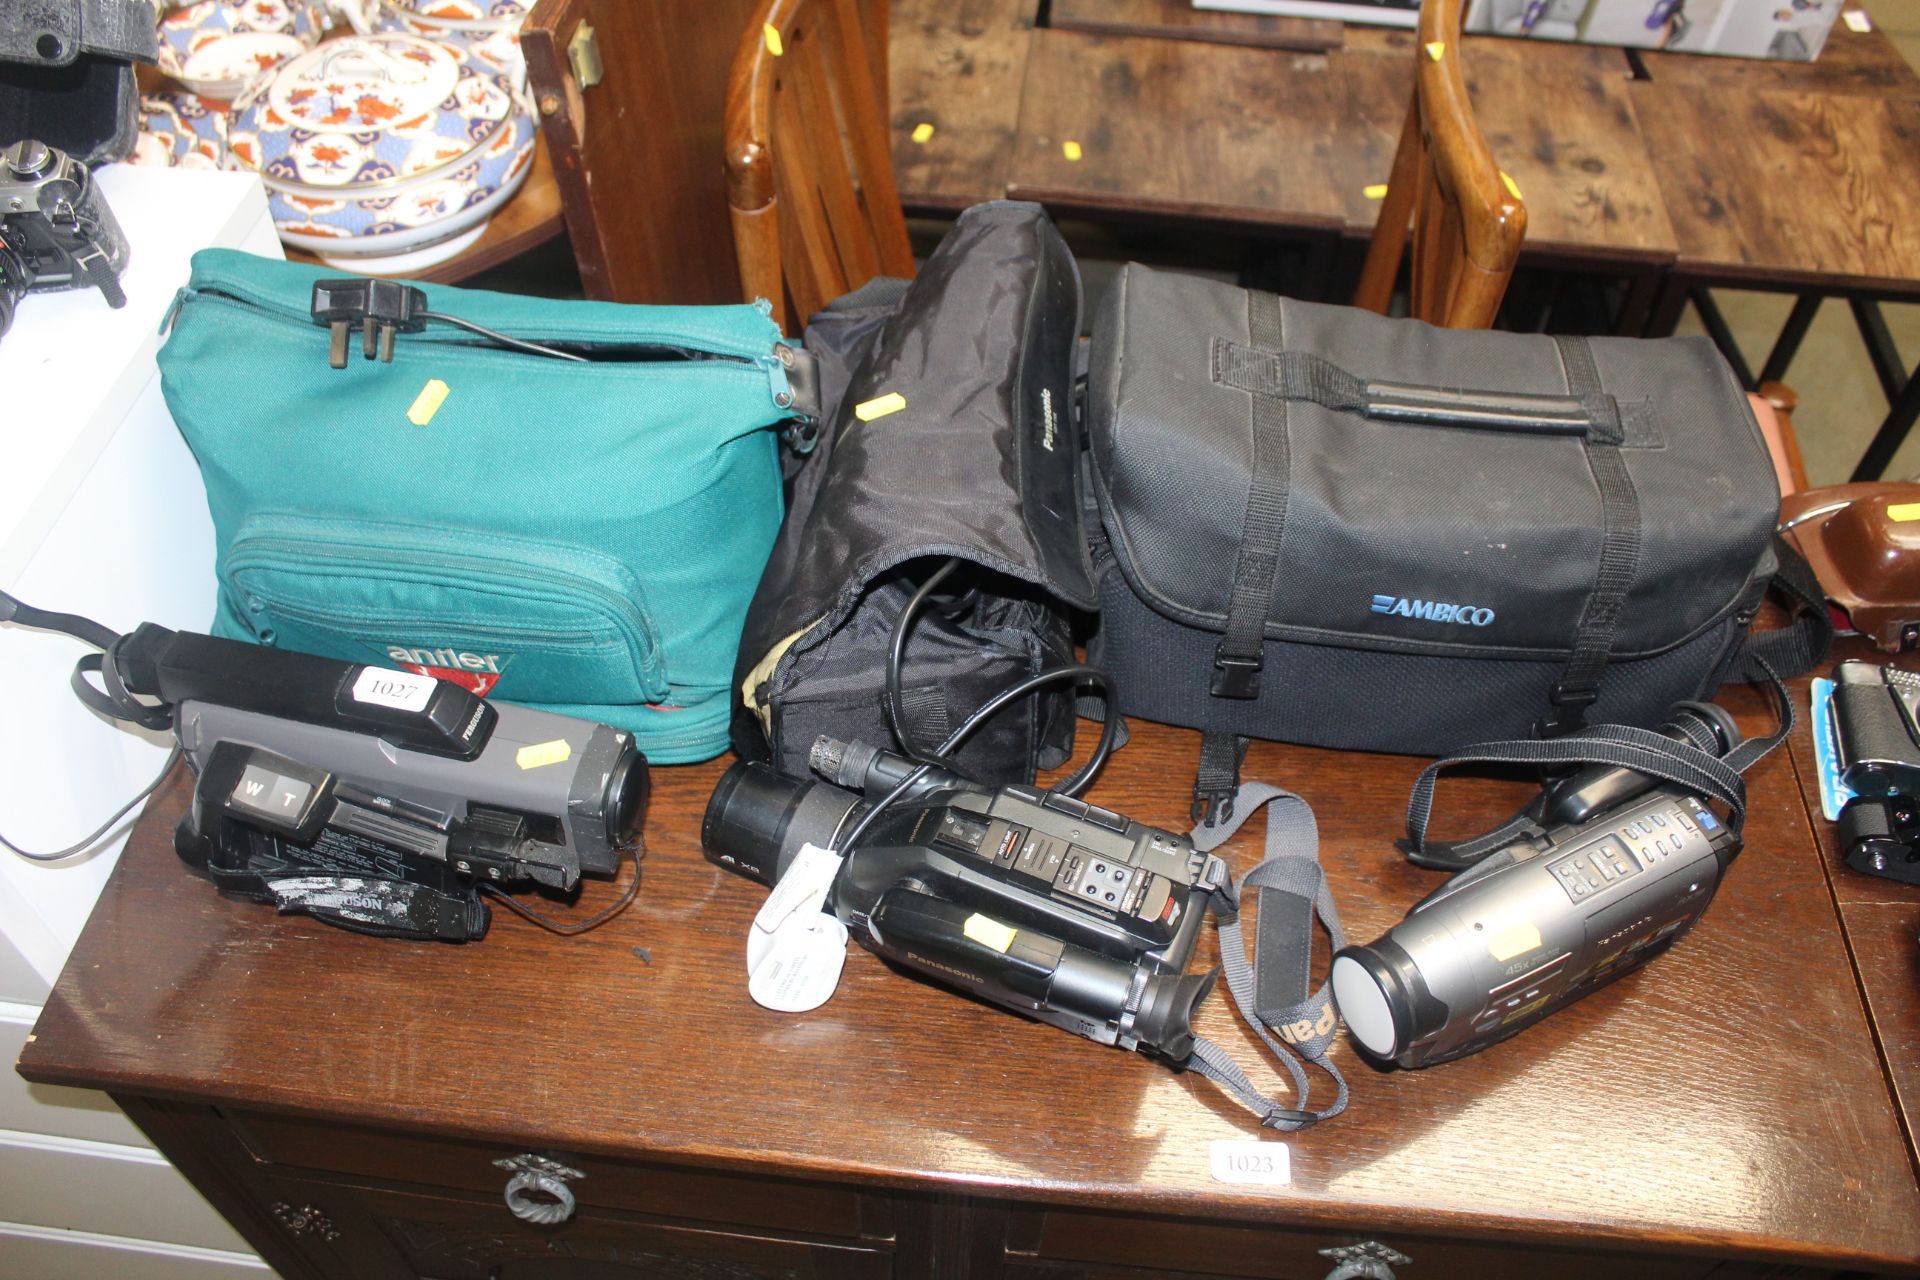 Two Panasonic camcorders and carry bags; and a Fer